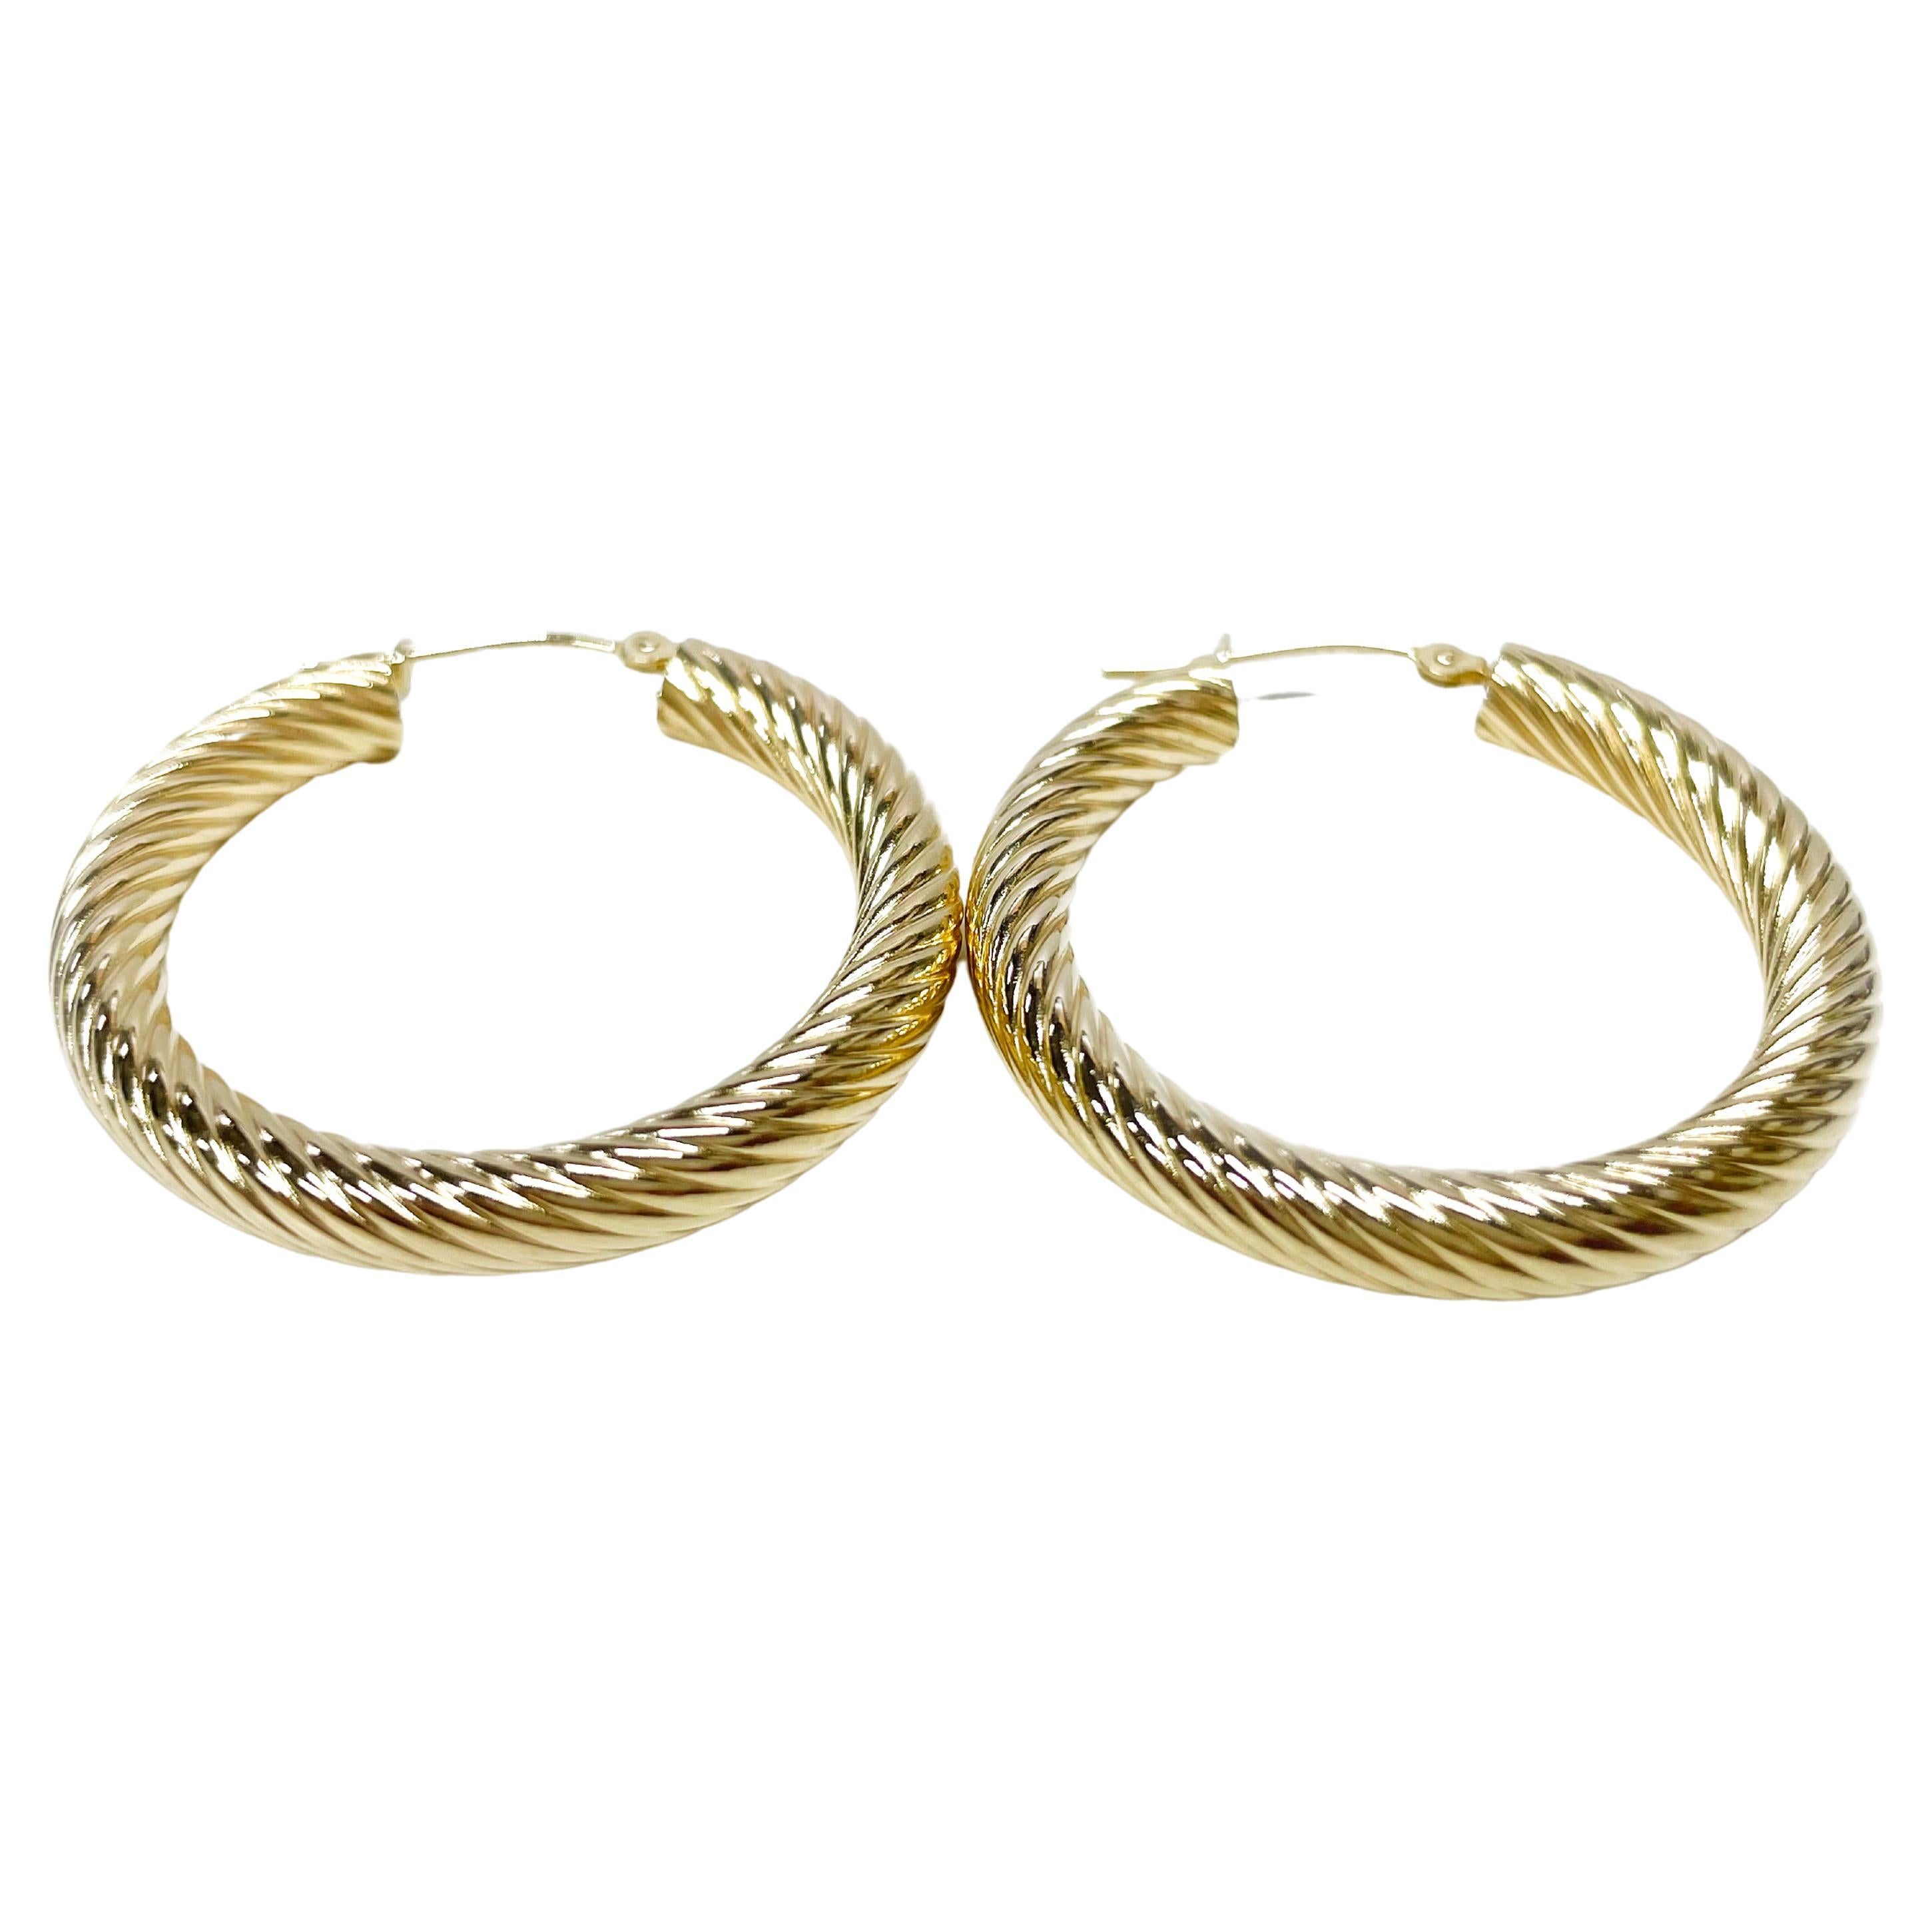 14 Karat Yellow Gold Cable Hoop Earrings. These classic lightweight hoops have just the right amount of detail in their cable design. The earrings have a joint and catch closure. Each earrings measures 30.7 x 30.7mm. The total gold weight of the